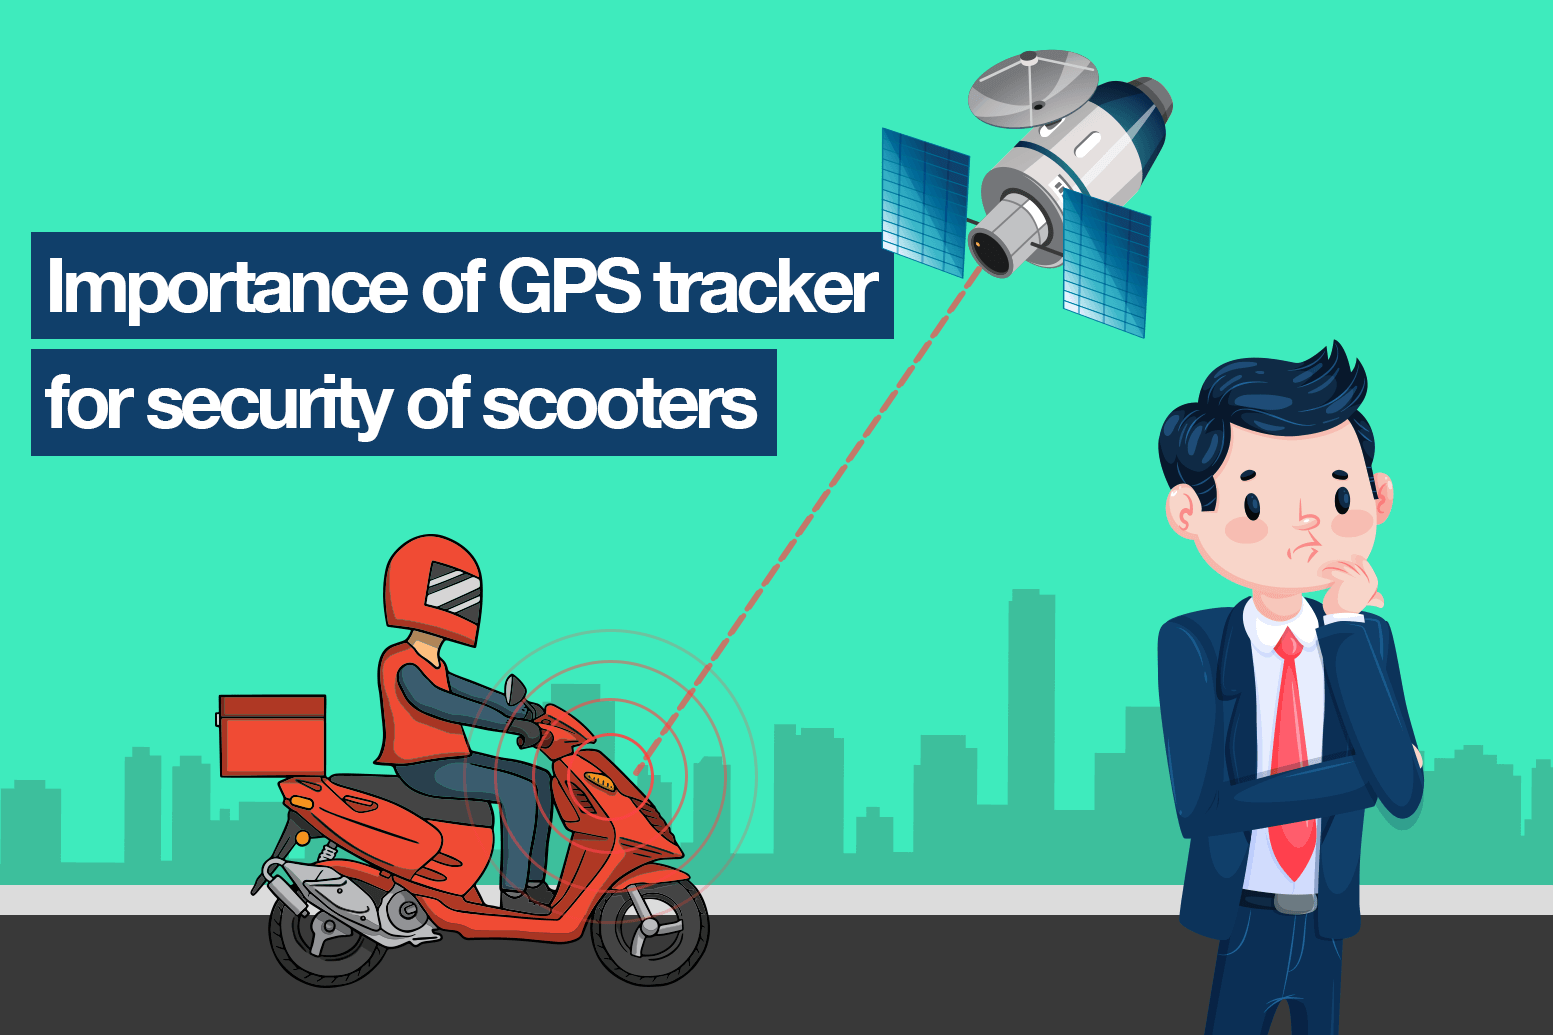 GPS tracker for scooty featured image by Onelap